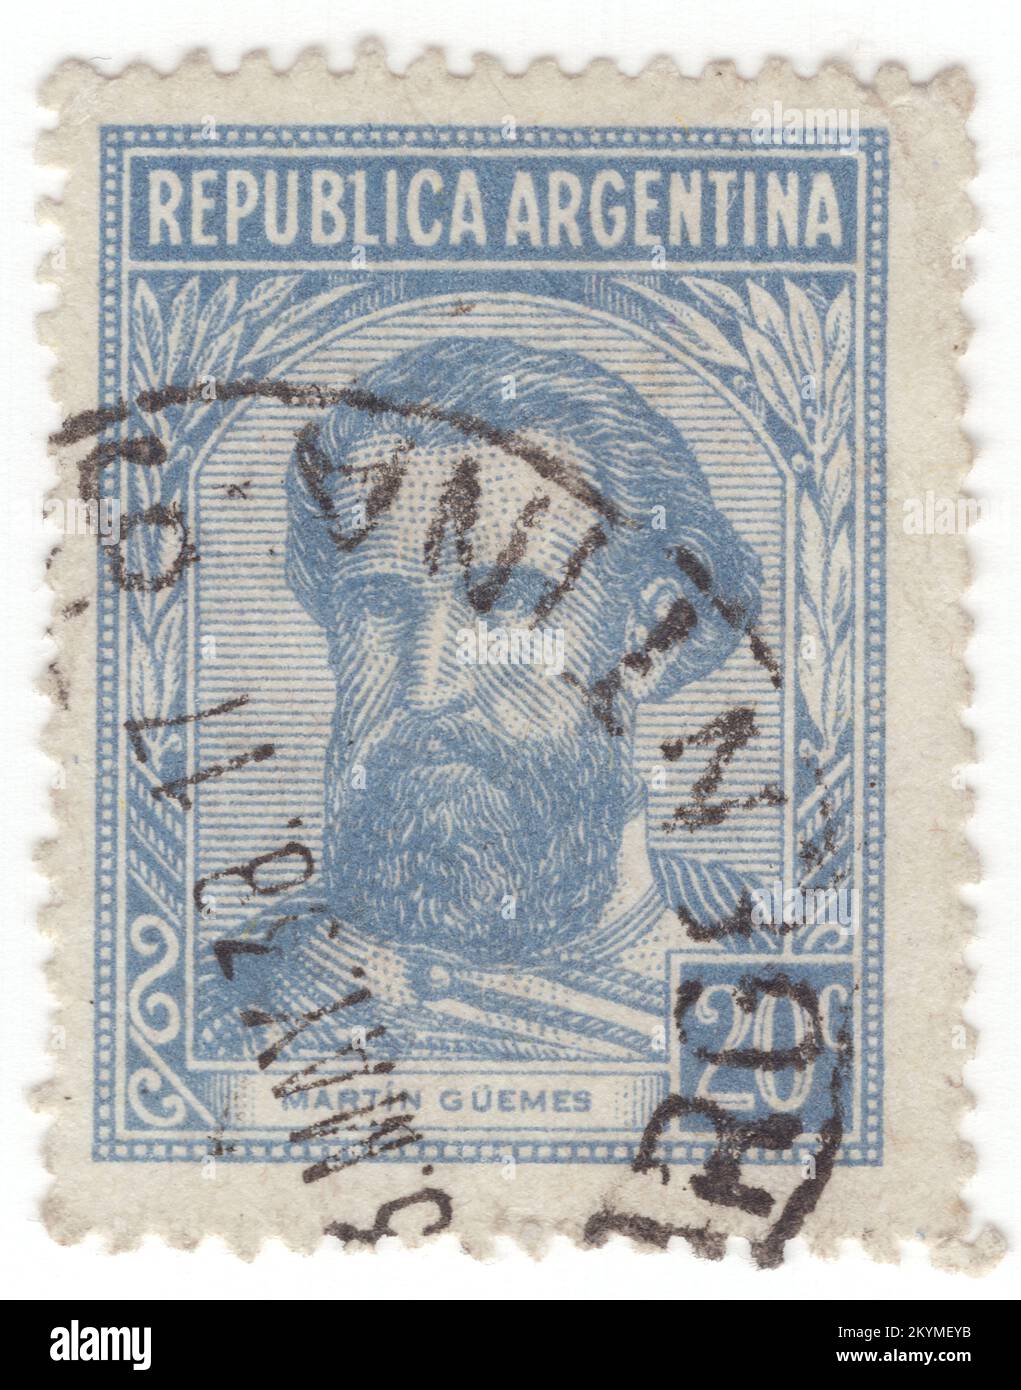 ARGENTINA - 1935: 20 centavos light ultramarine postage stamp depicting portrait of Martin Guemes. Martin Miguel de Guemes was a military leader and popular caudillo who defended northwestern Argentina from the Spanish royalist army during the Argentine War of Independence. Güemes organized the resistance against the royalists (forces loyal to Spain) employing local gauchos trained in guerrilla tactics. He was appointed Governor of Salta Province and in November of that year, General José Rondeau, appointed leader of the Peru campaign to replace José de San Martín Stock Photo